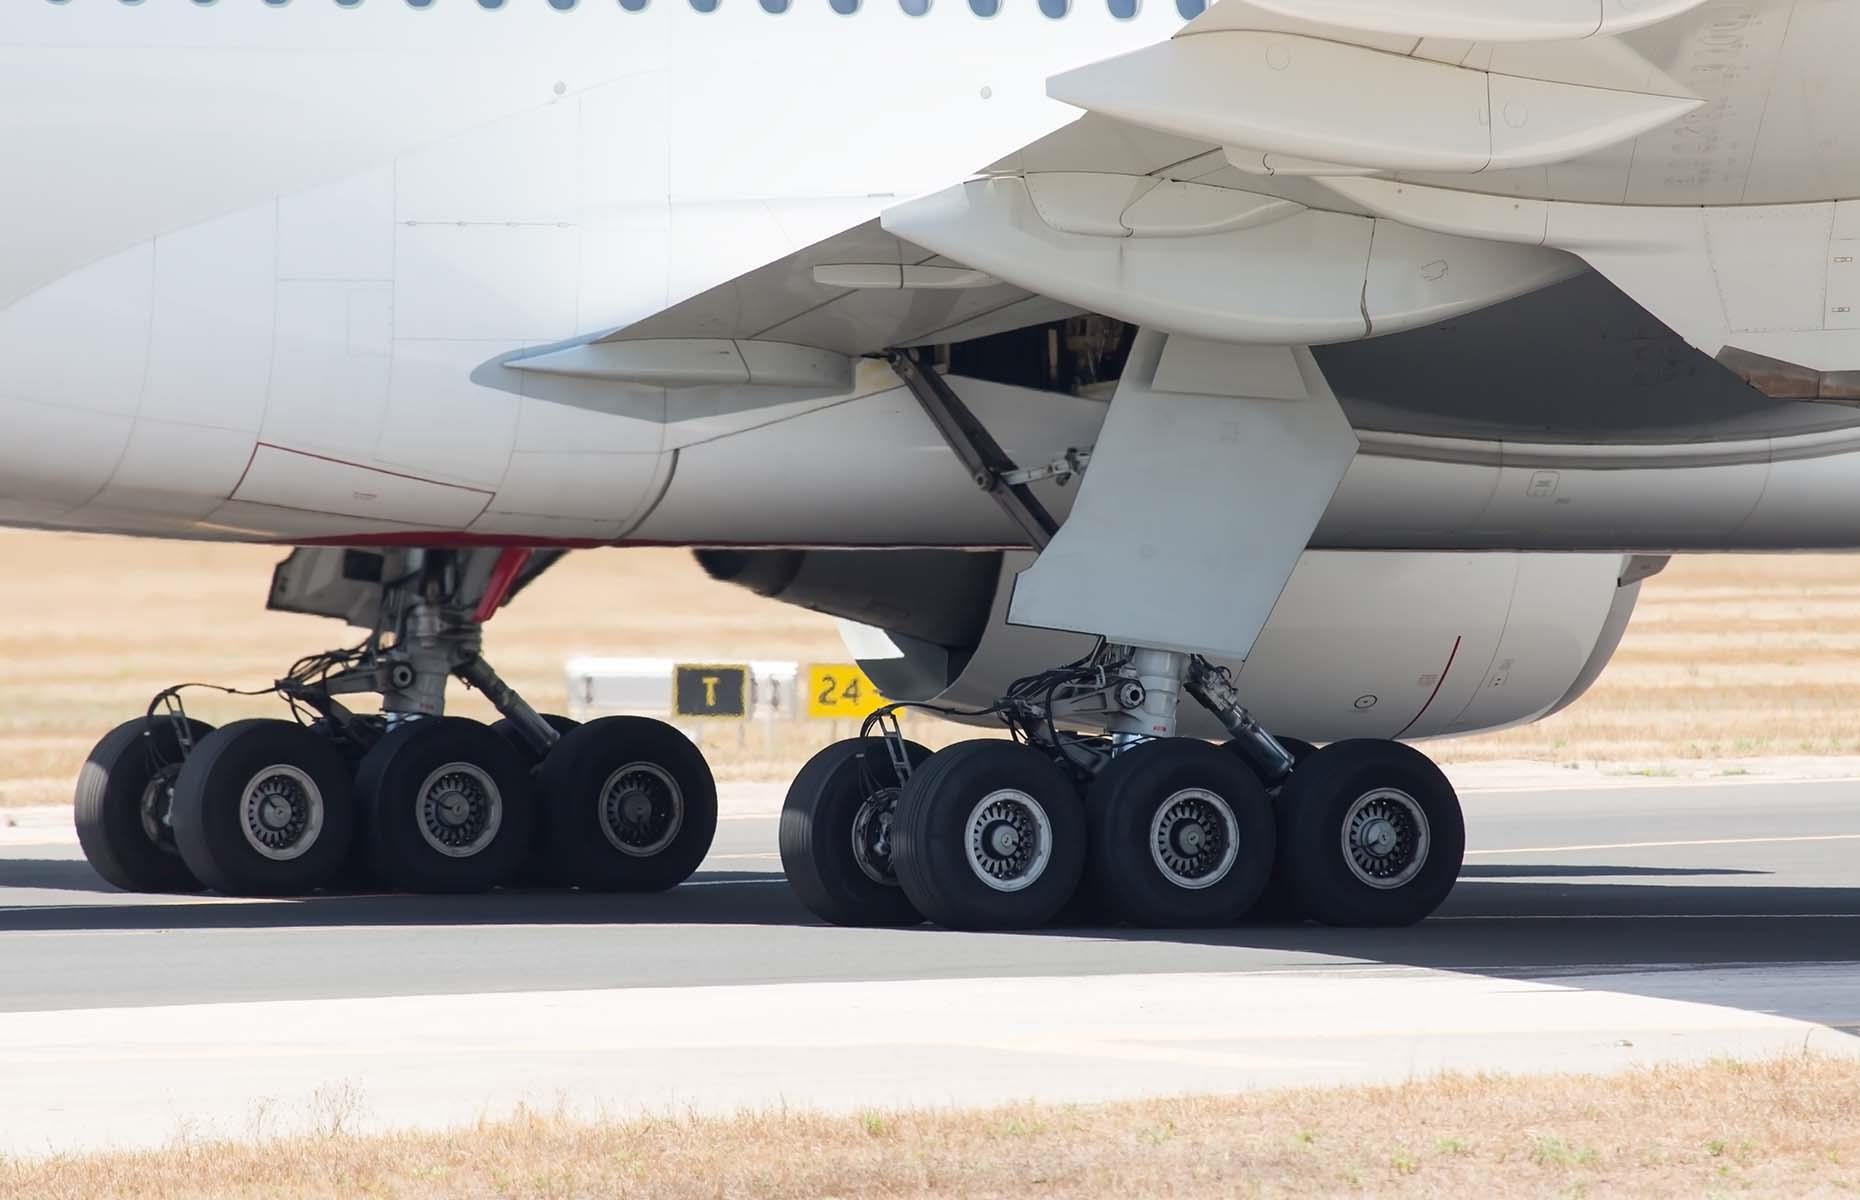 <p>One of the most defining features of the Triple Seven, as it's known informally, is its large landing gear. Each leg has a set of six tyres, making it capable of withstanding a load of up to 32.3 tonnes (29,294 kg). The aircraft also still holds the record for the longest nonstop flight by a (non scheduled) commercial aeroplane, set in 2005 when the 777 flew eastbound from Hong Kong to London, covering 13,422 miles (21,633km).</p>  <p><a href="https://www.loveexploring.com/gallerylist/79093/groundbreaking-airlines-that-no-longer-fly"><strong>Find out which groundbreaking airlines no longer fly</strong></a></p>